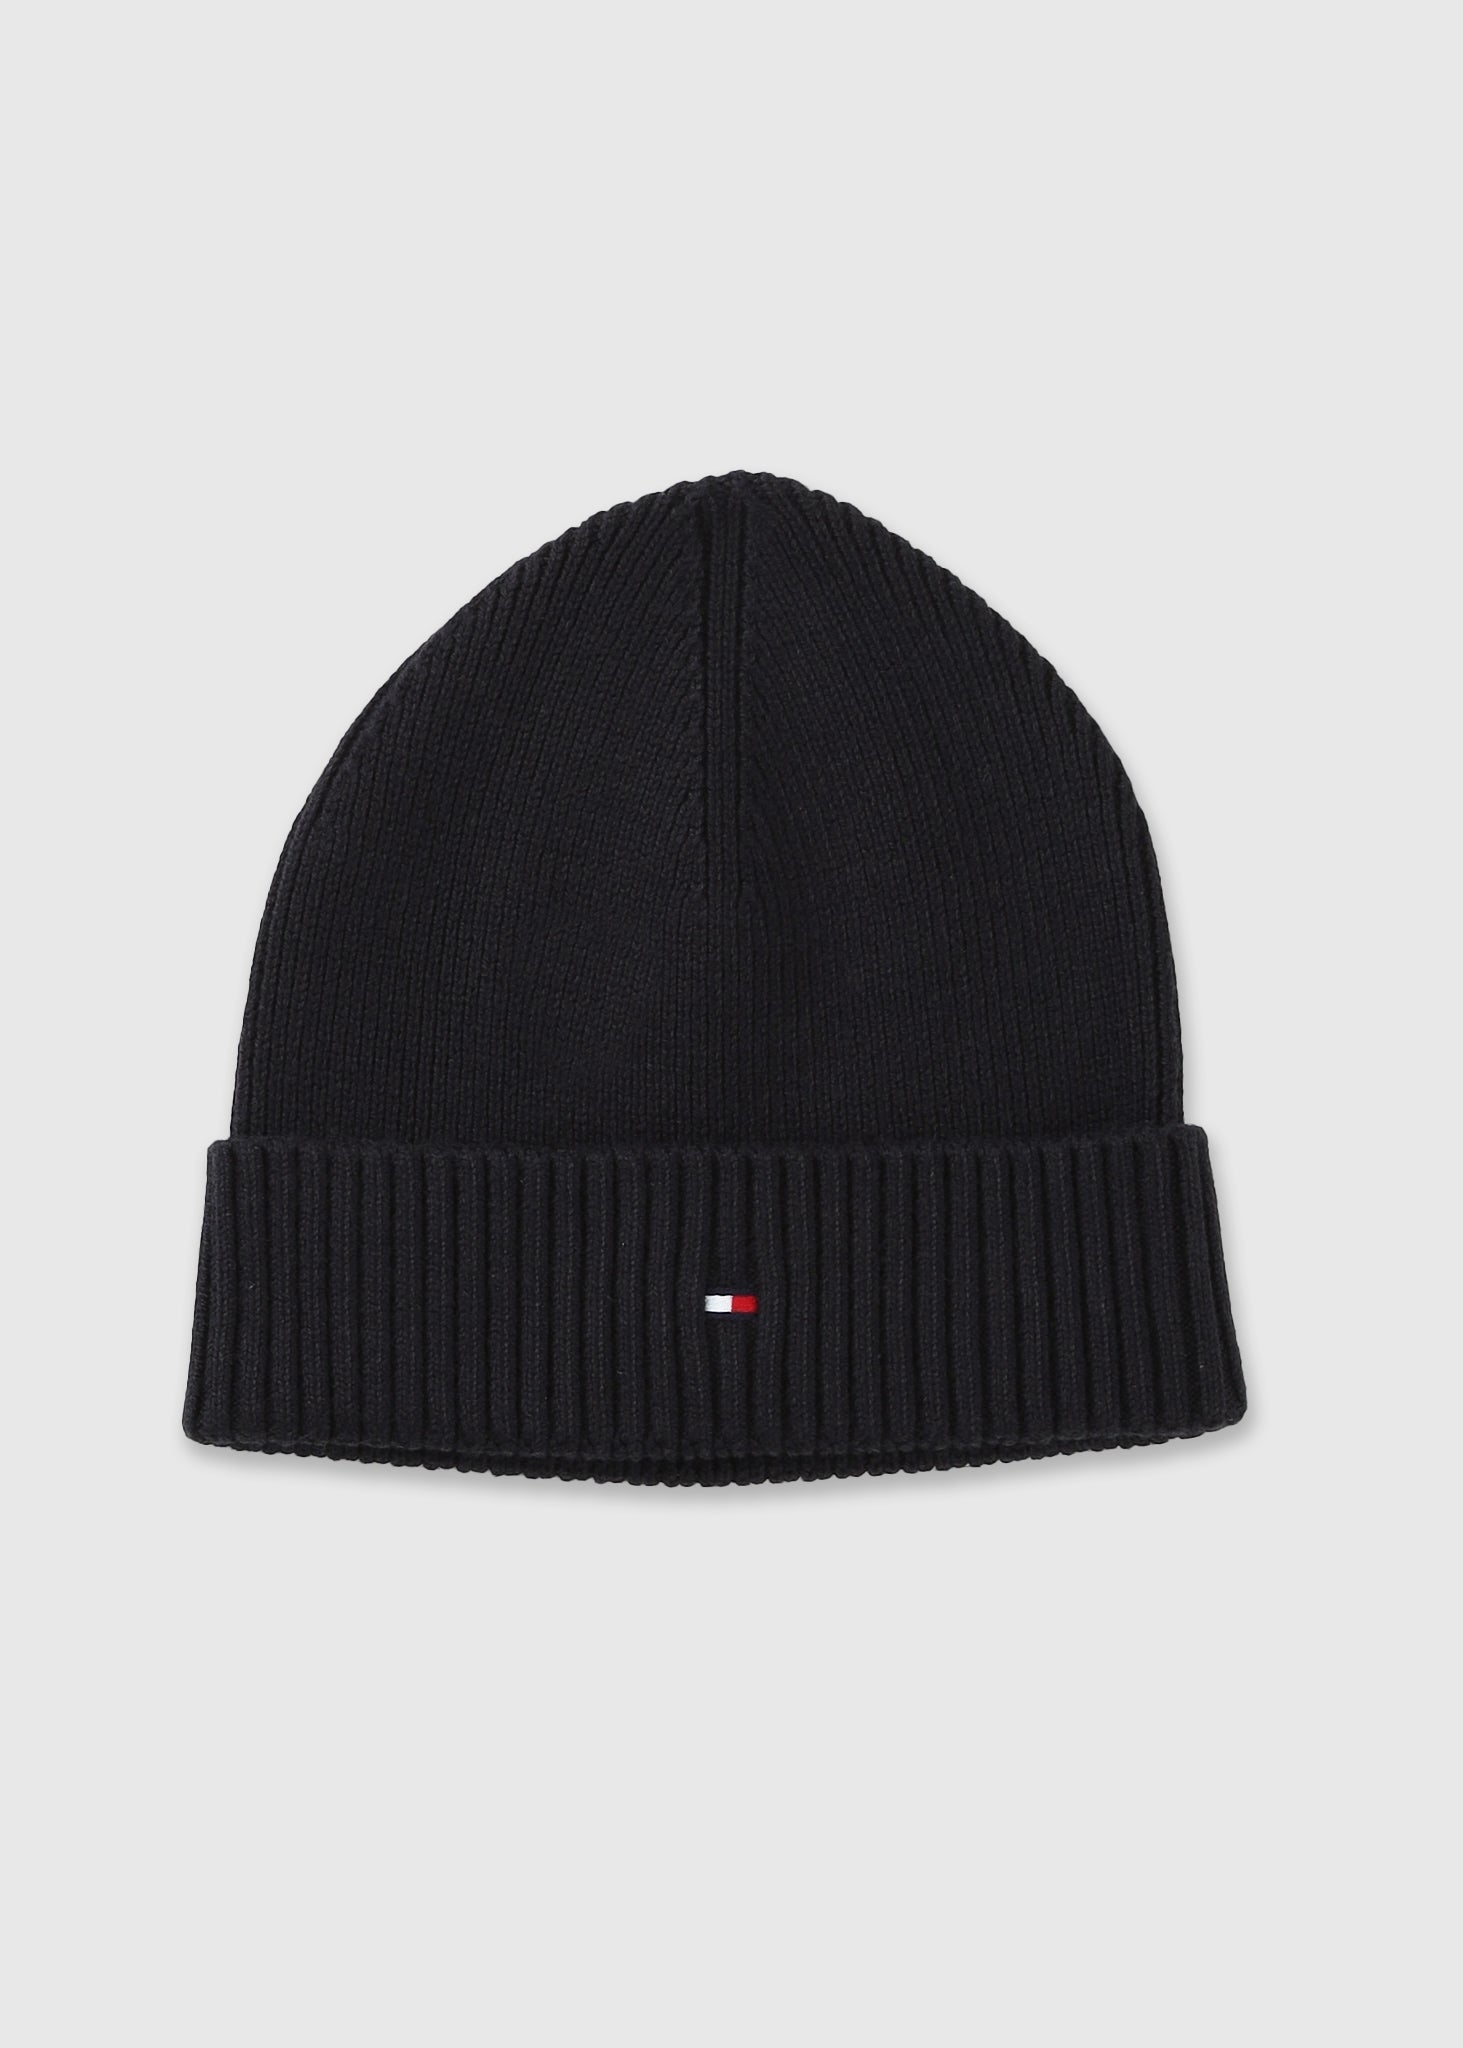 Image of Tommy Hilfiger Mens Essential Flag Beanie In Black